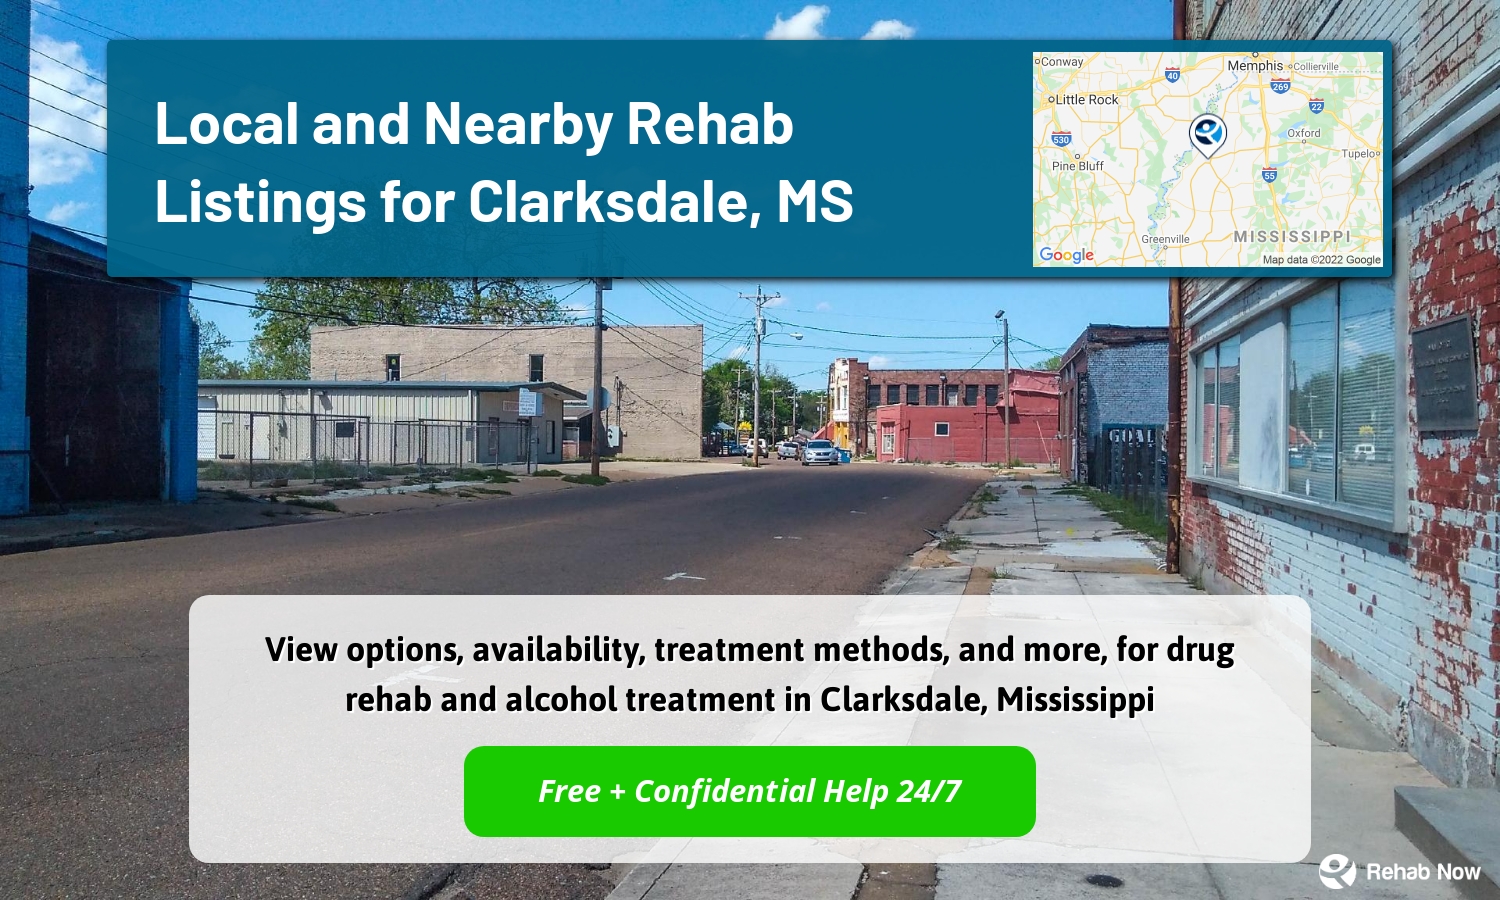 View options, availability, treatment methods, and more, for drug rehab and alcohol treatment in Clarksdale, Mississippi